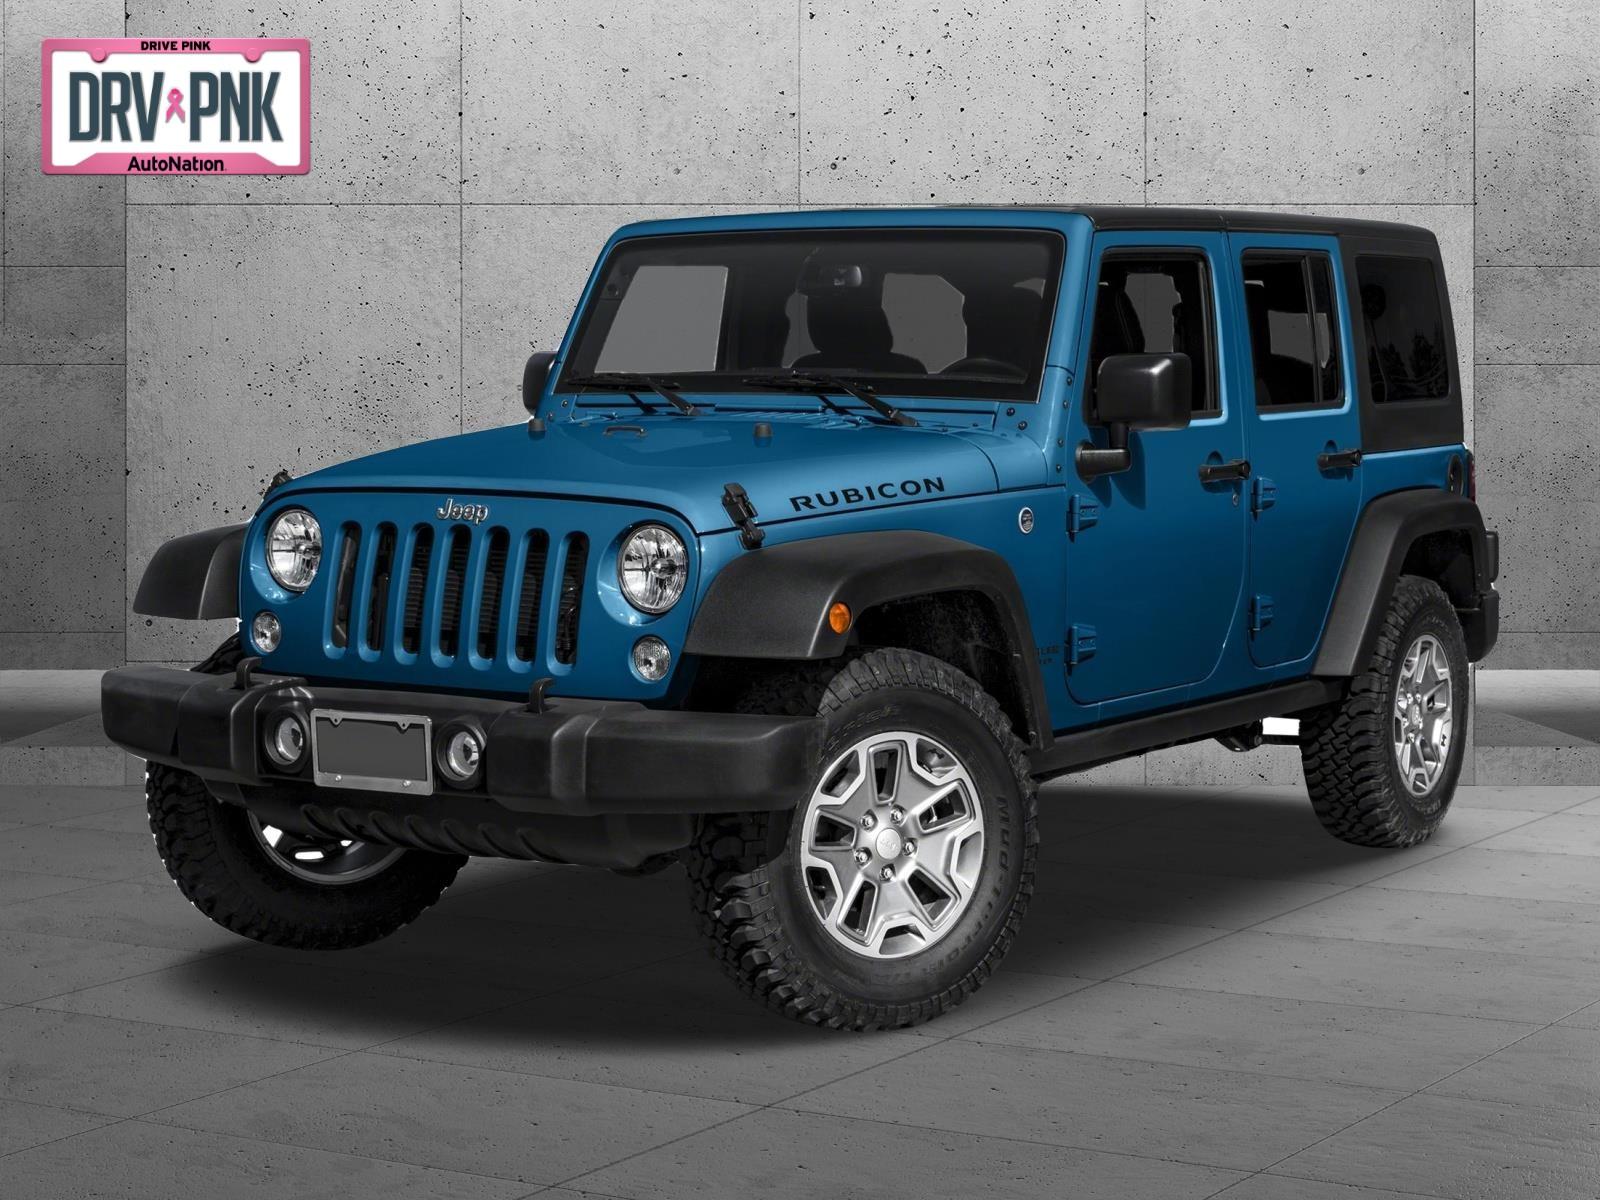 Used Hydro Blue Pearlcoat 16 Jeep Wrangler Unlimited 4wd 4dr Rubicon Hard Rock In Corpus Christi Tx Gl